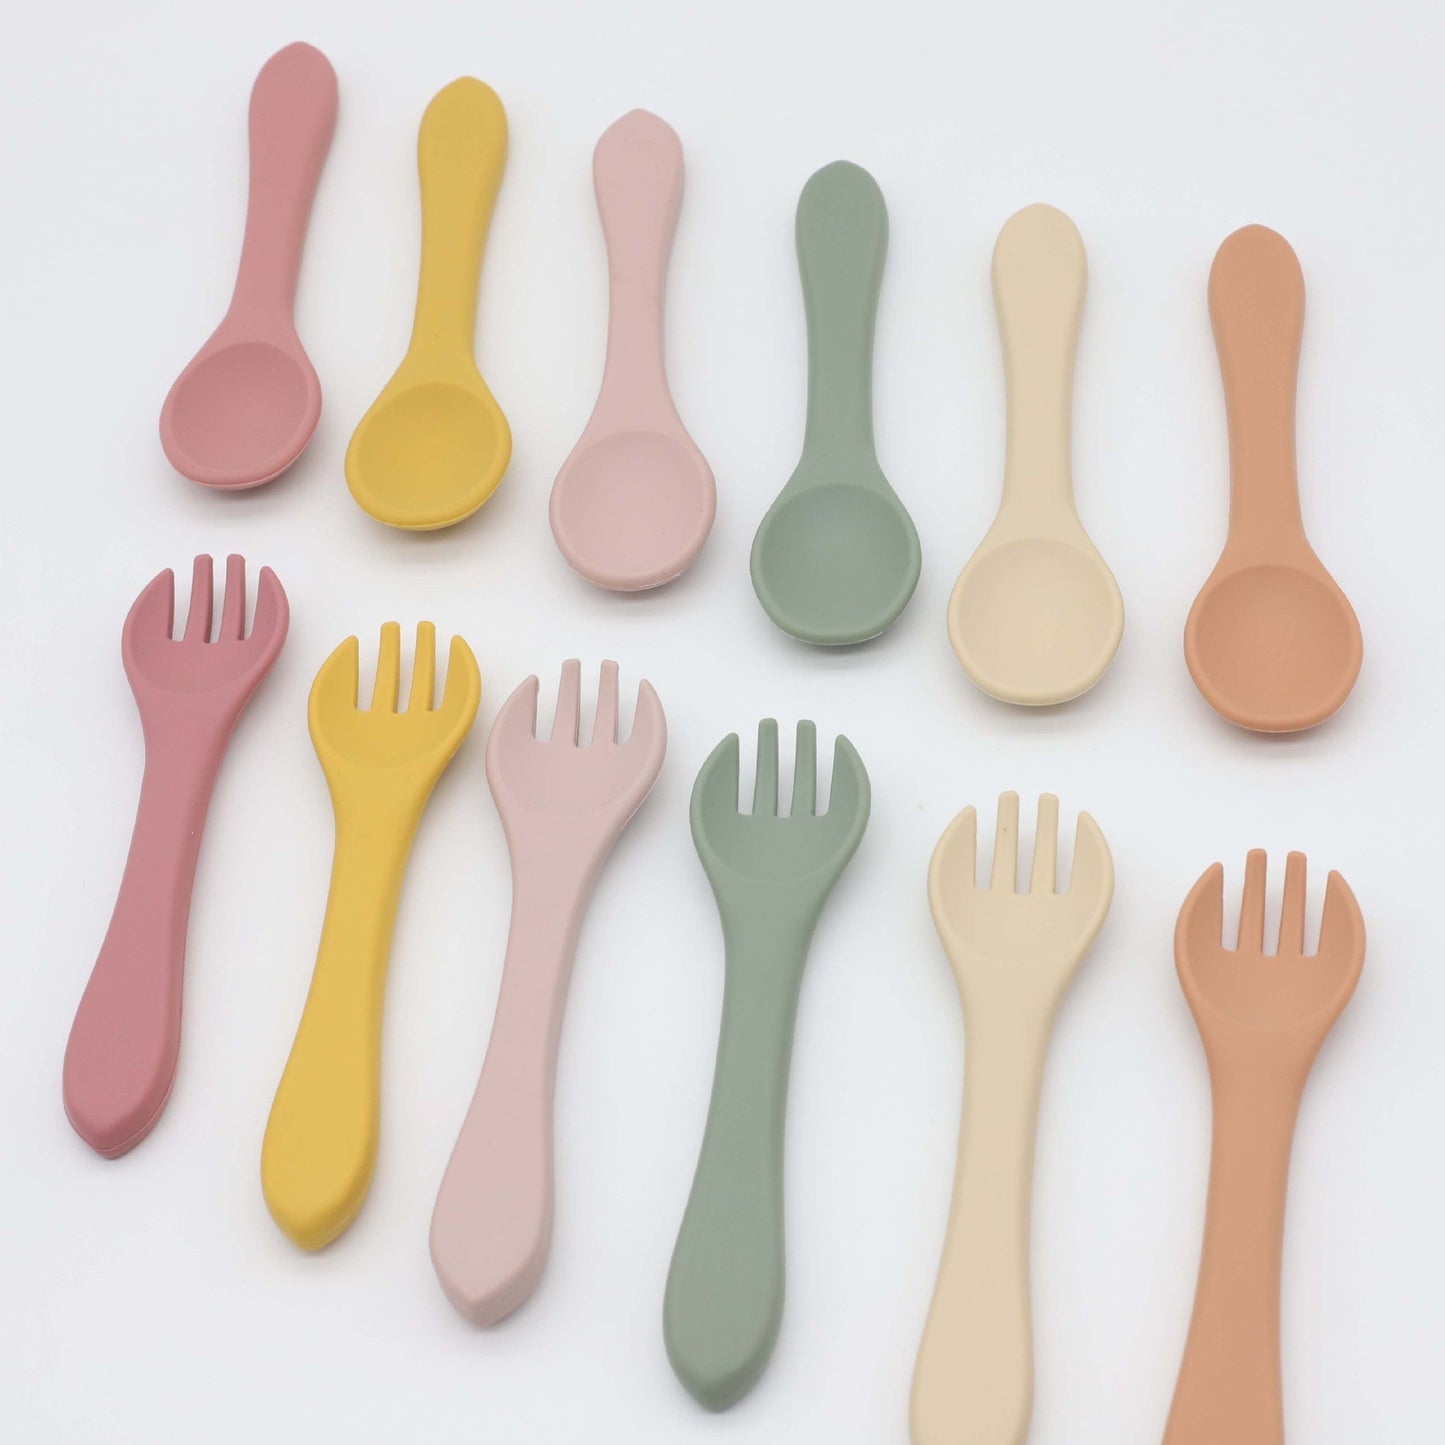 Baby Food Grade Complementary Food Training Silicone Spoon Fork Sets-15